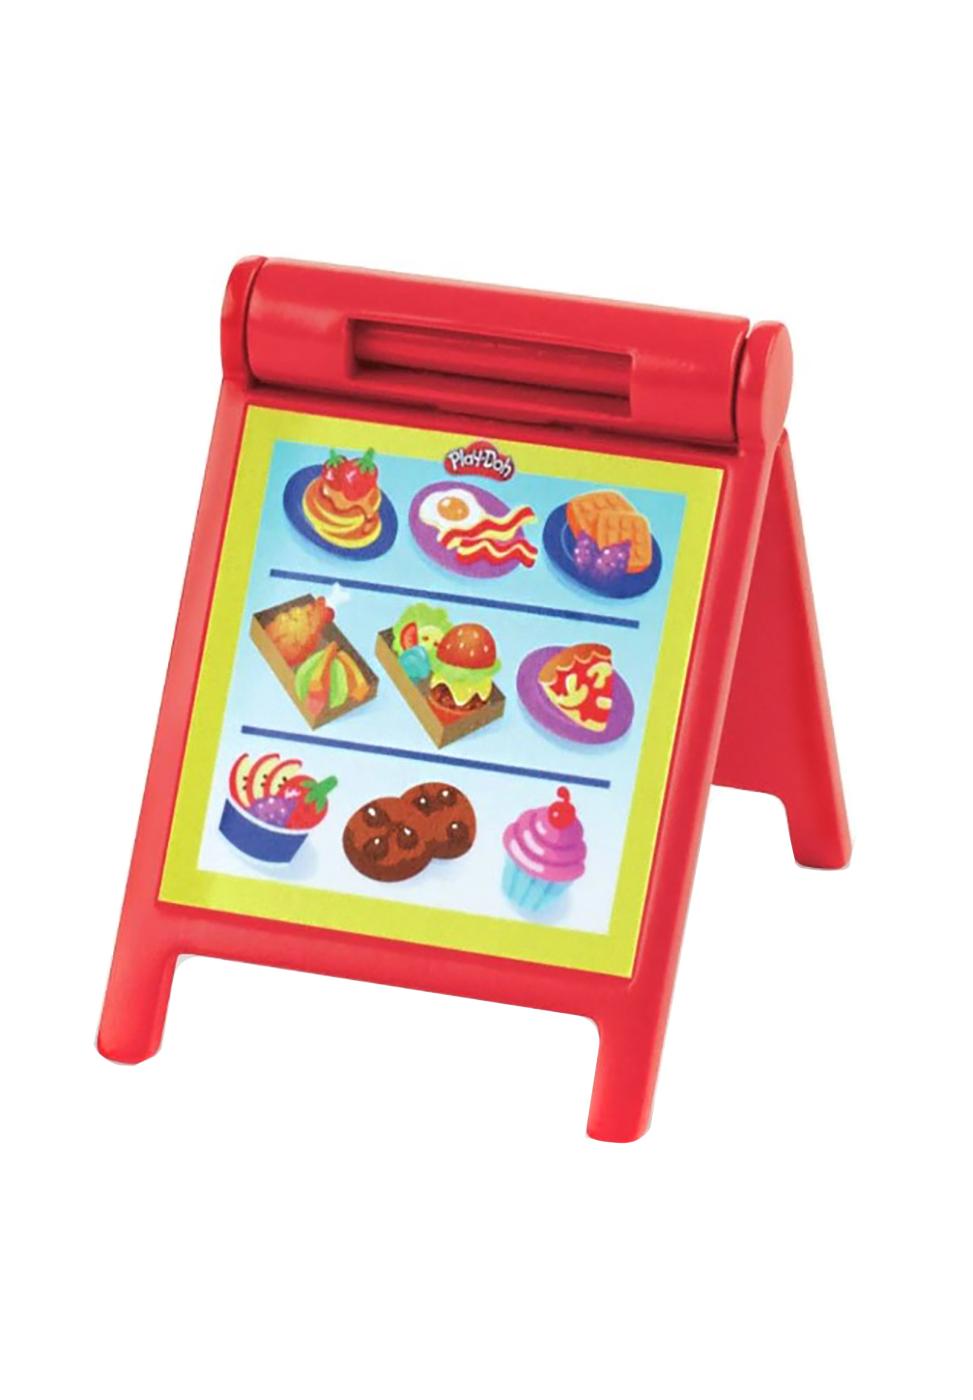 Play-Doh Kitchen Creations Busy Chef's Restaurant Playset, 2-Sided Play  Kitchen, Ages 3+ - Play-Doh